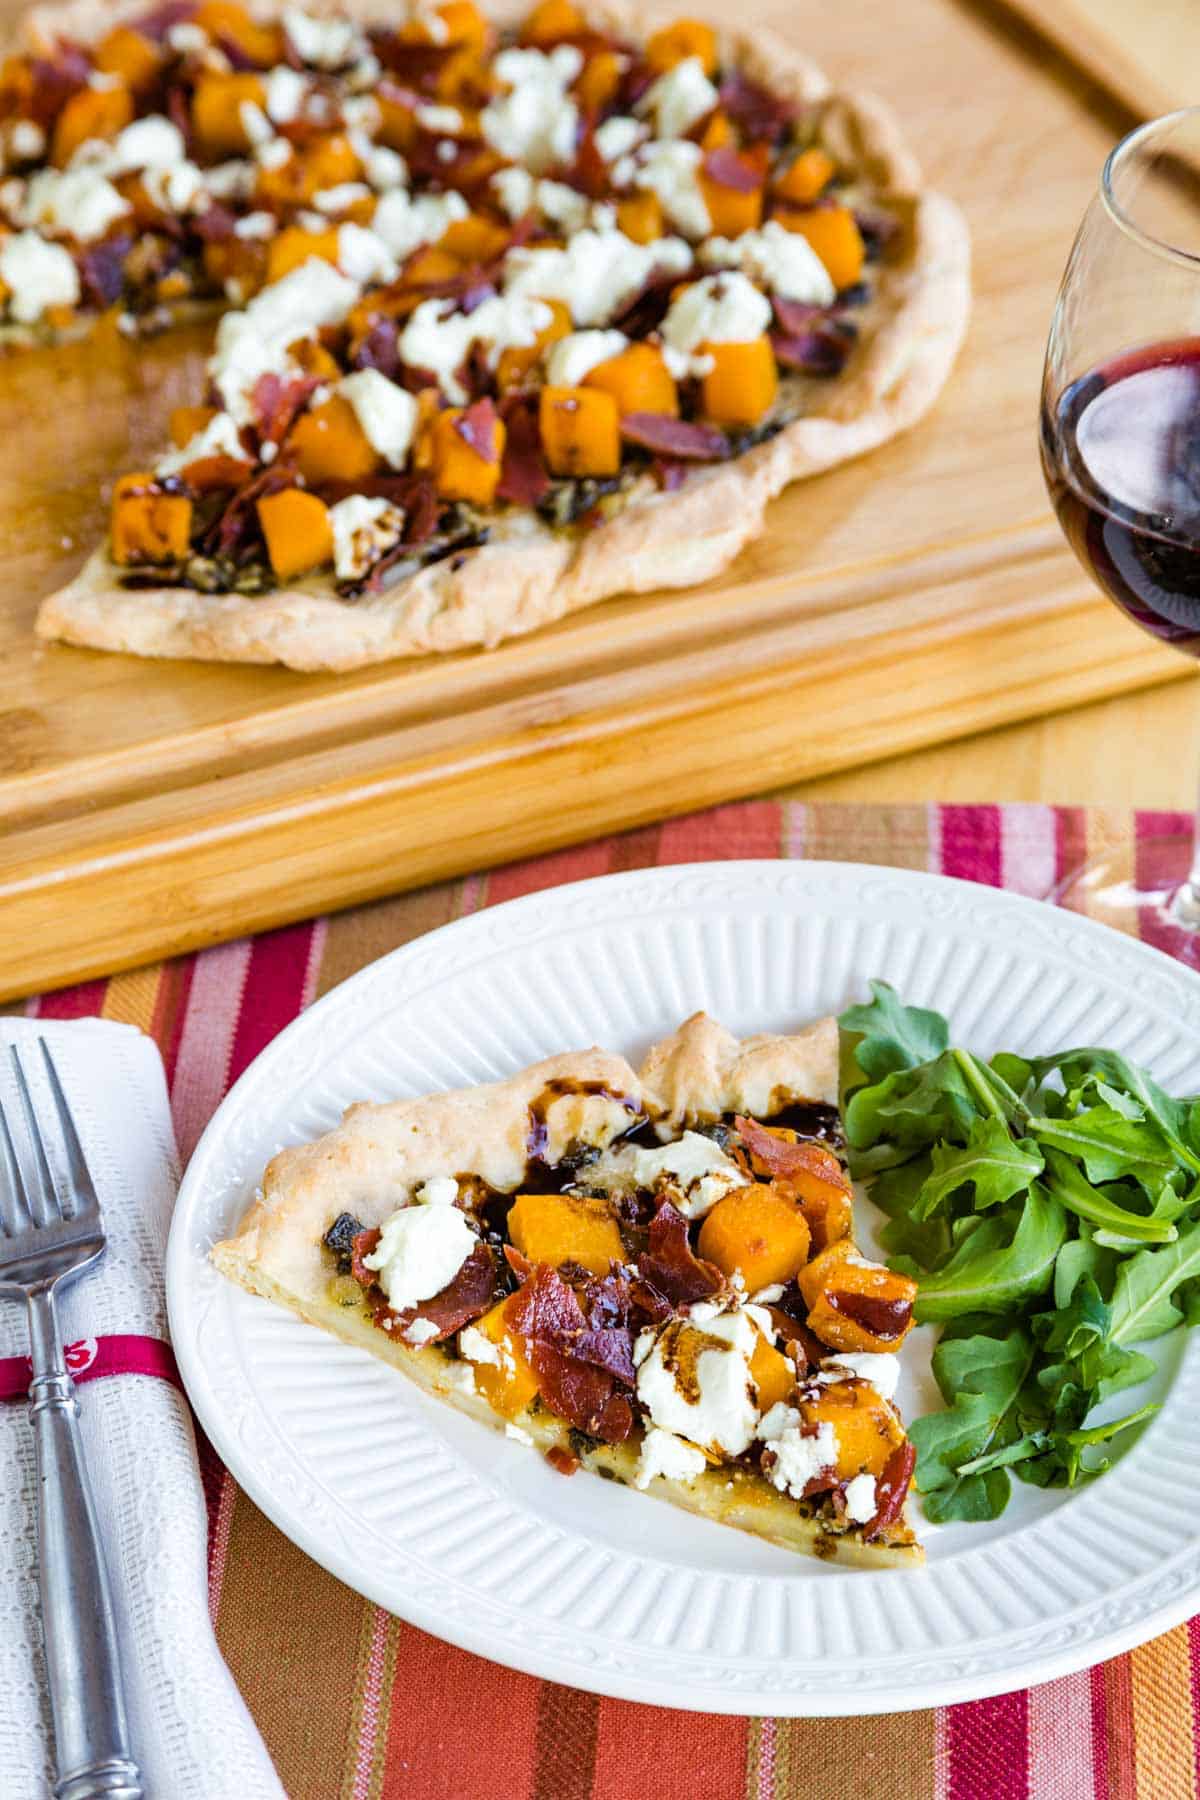 A plate of arugula and a slice of butternut squash pizza on a striped placement in front of a cutting board with the rest of the pizza.